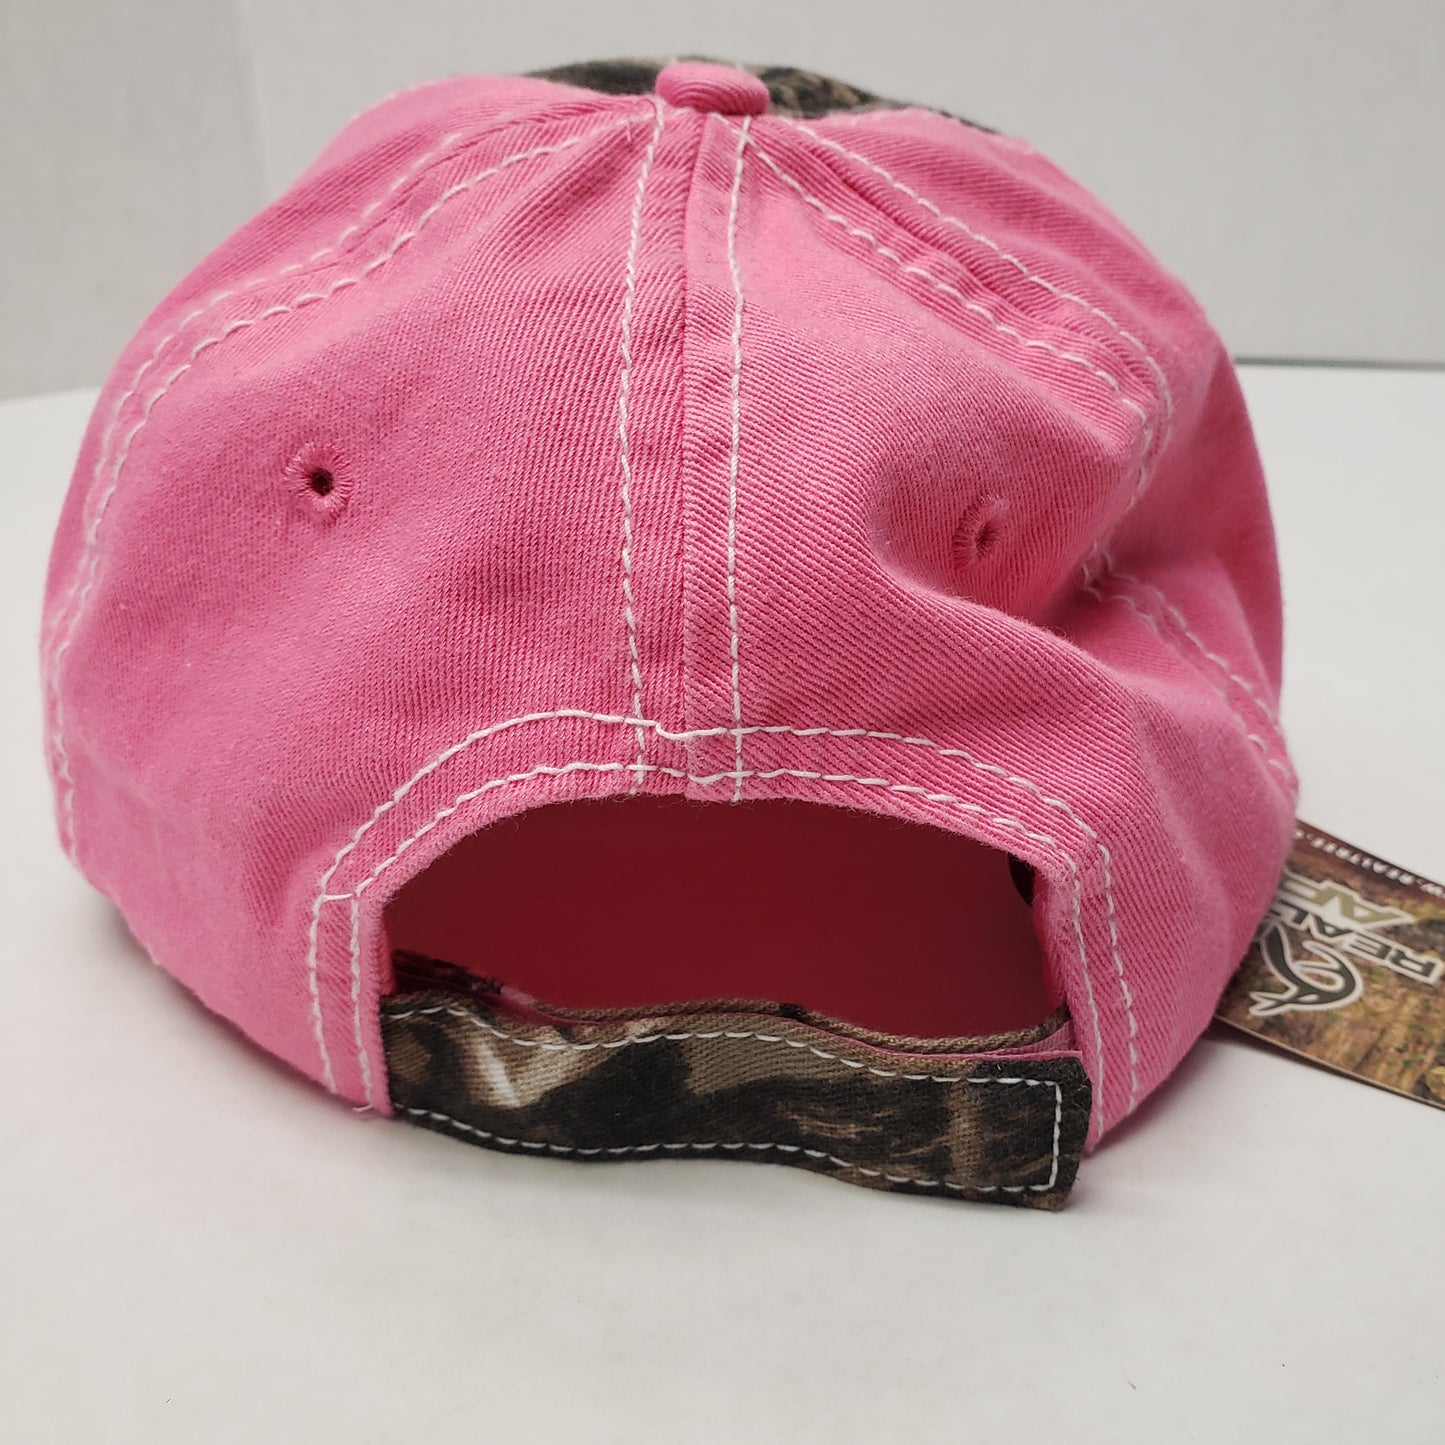 New Authentic RealTree Hat Adjustable Camo/ Pink Back & Around Bill